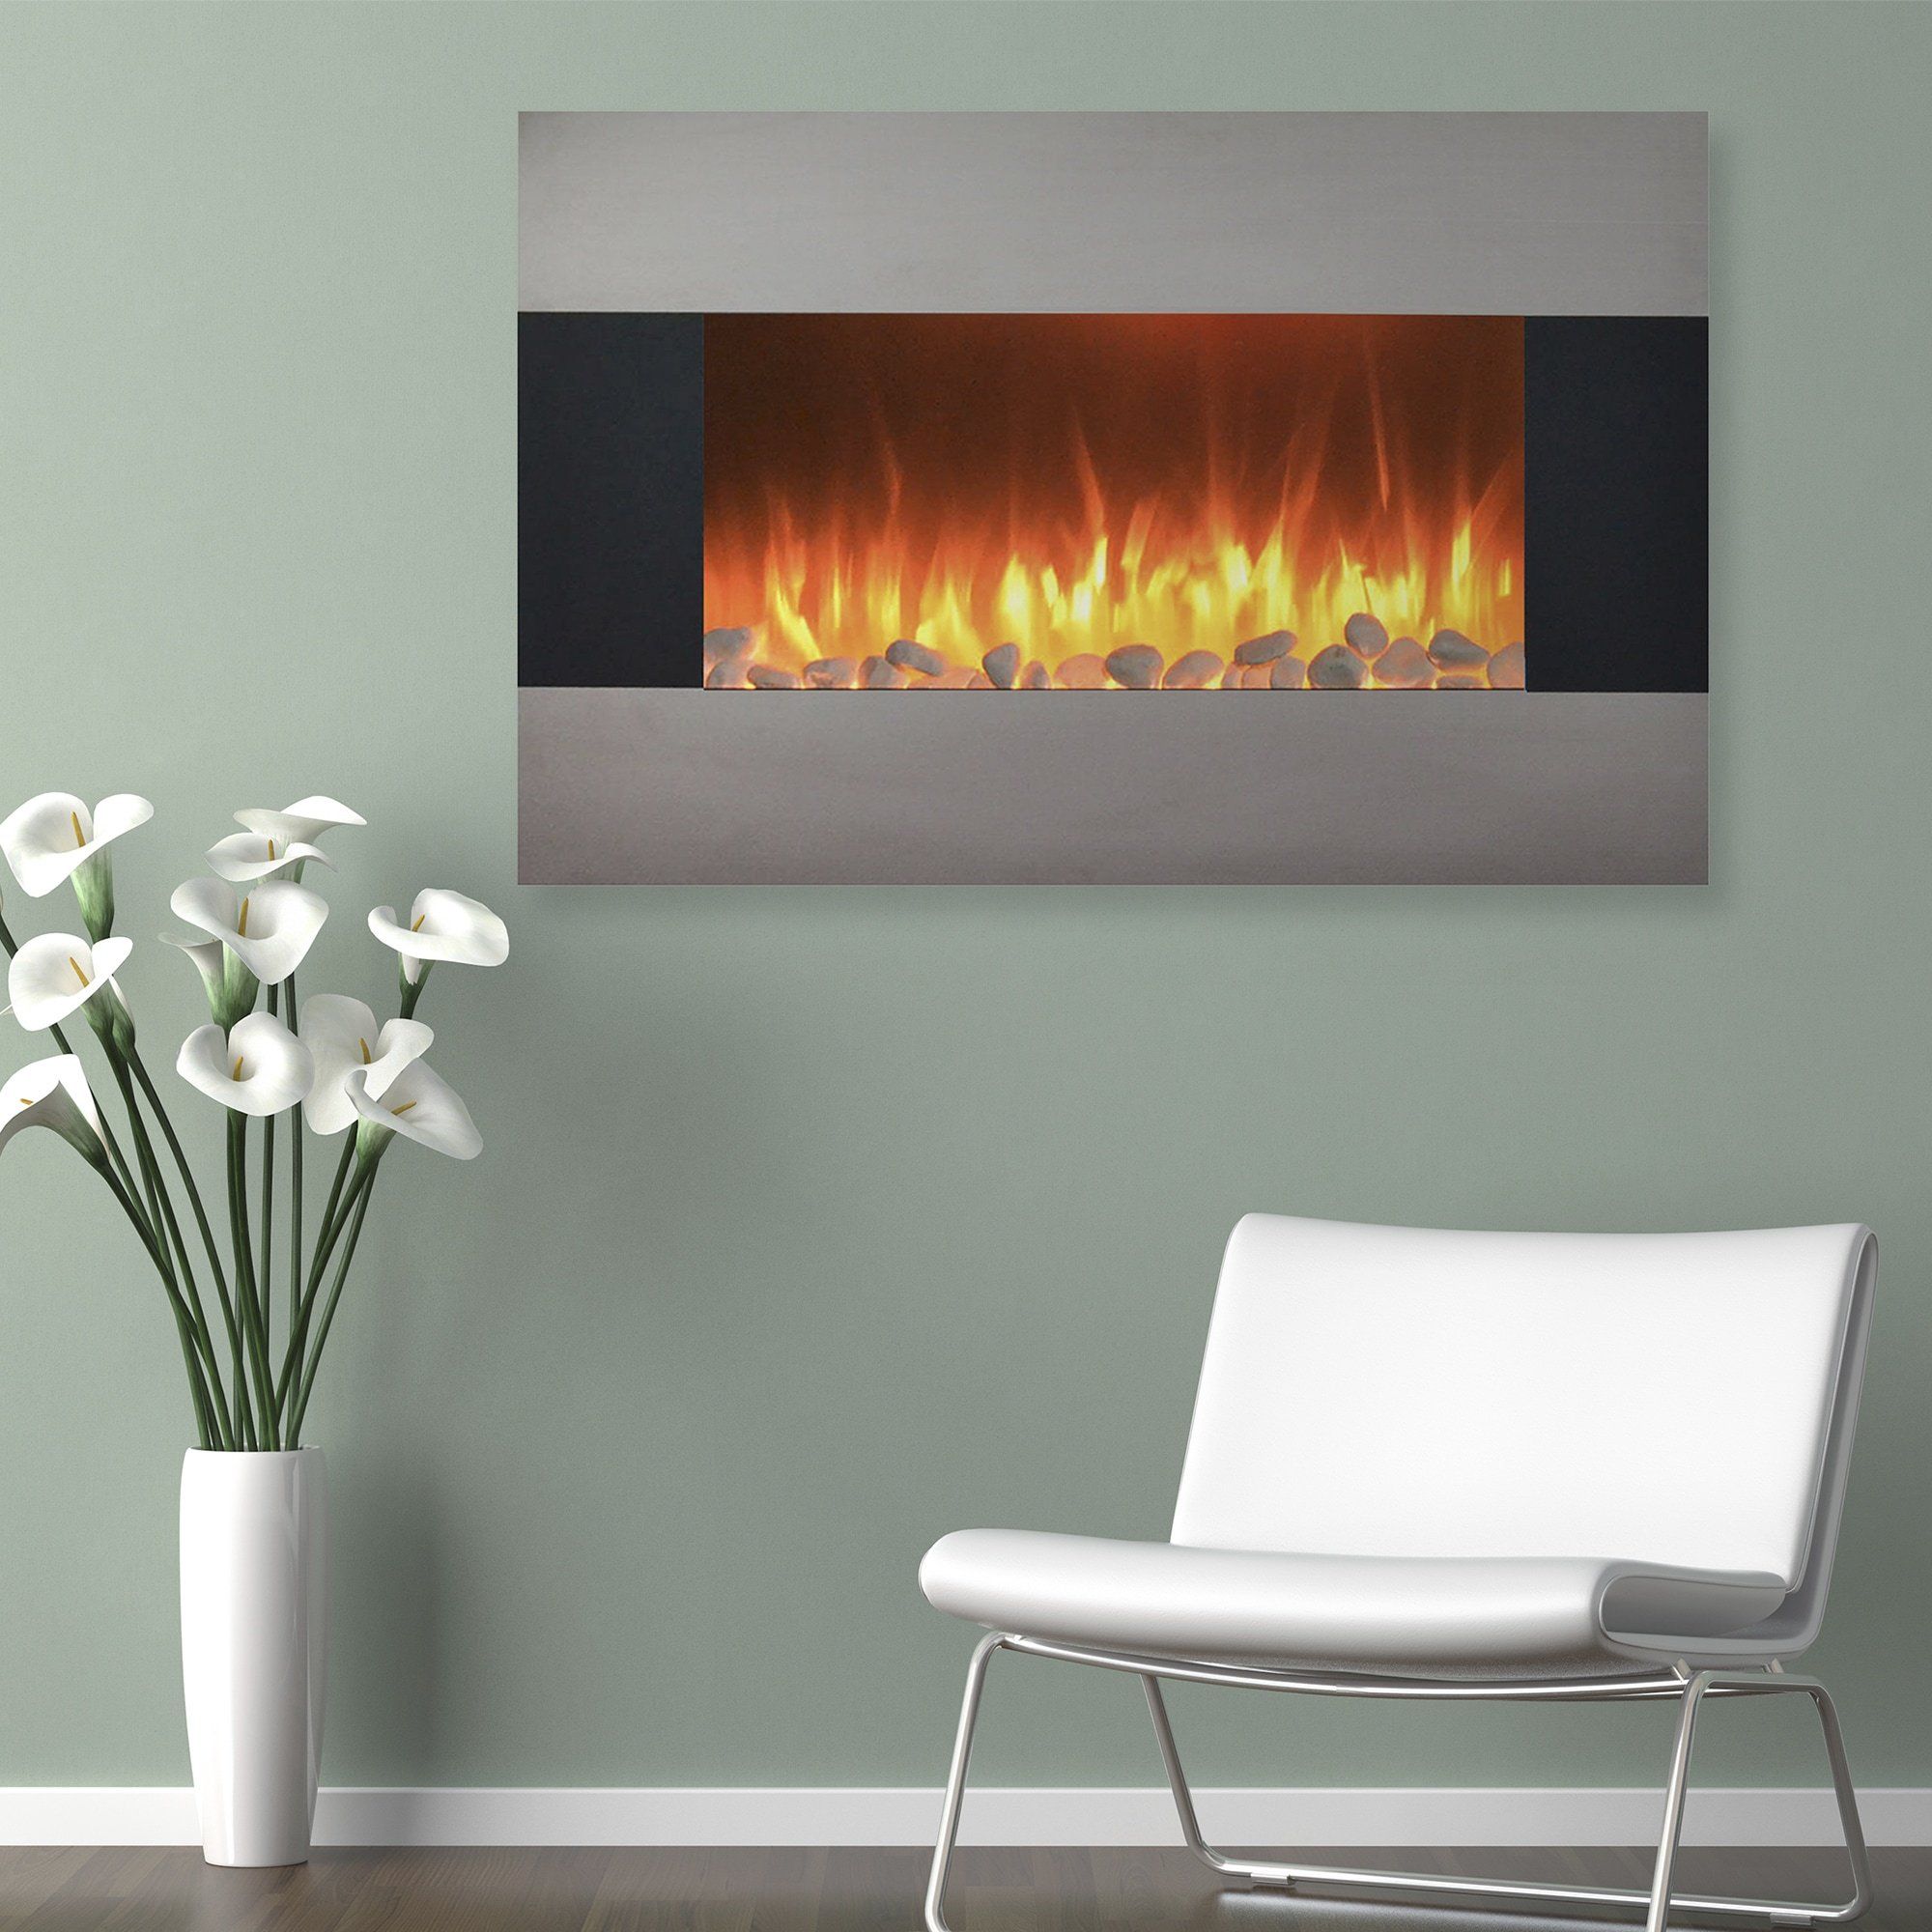 Stainless Steel Electric Fireplace New 36 Inch Stainless Steel Electric Fireplace with Wall Mount